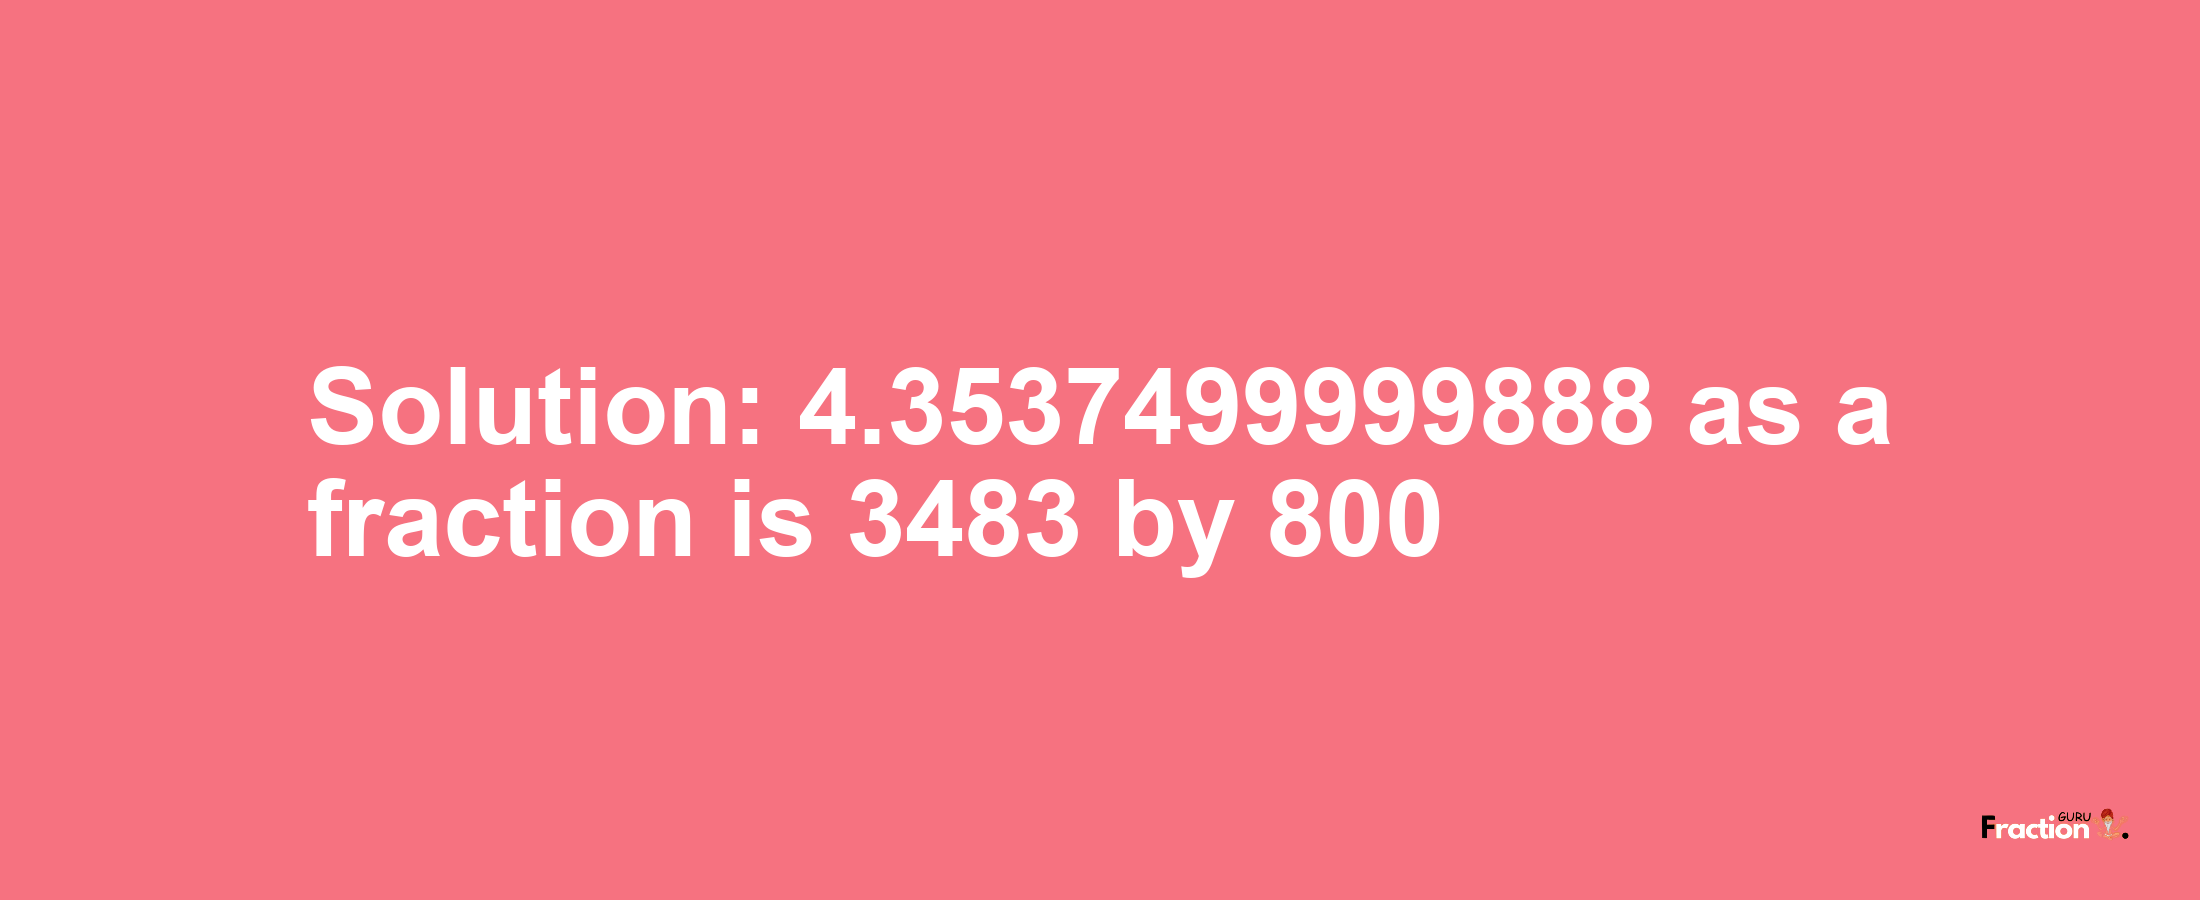 Solution:4.3537499999888 as a fraction is 3483/800